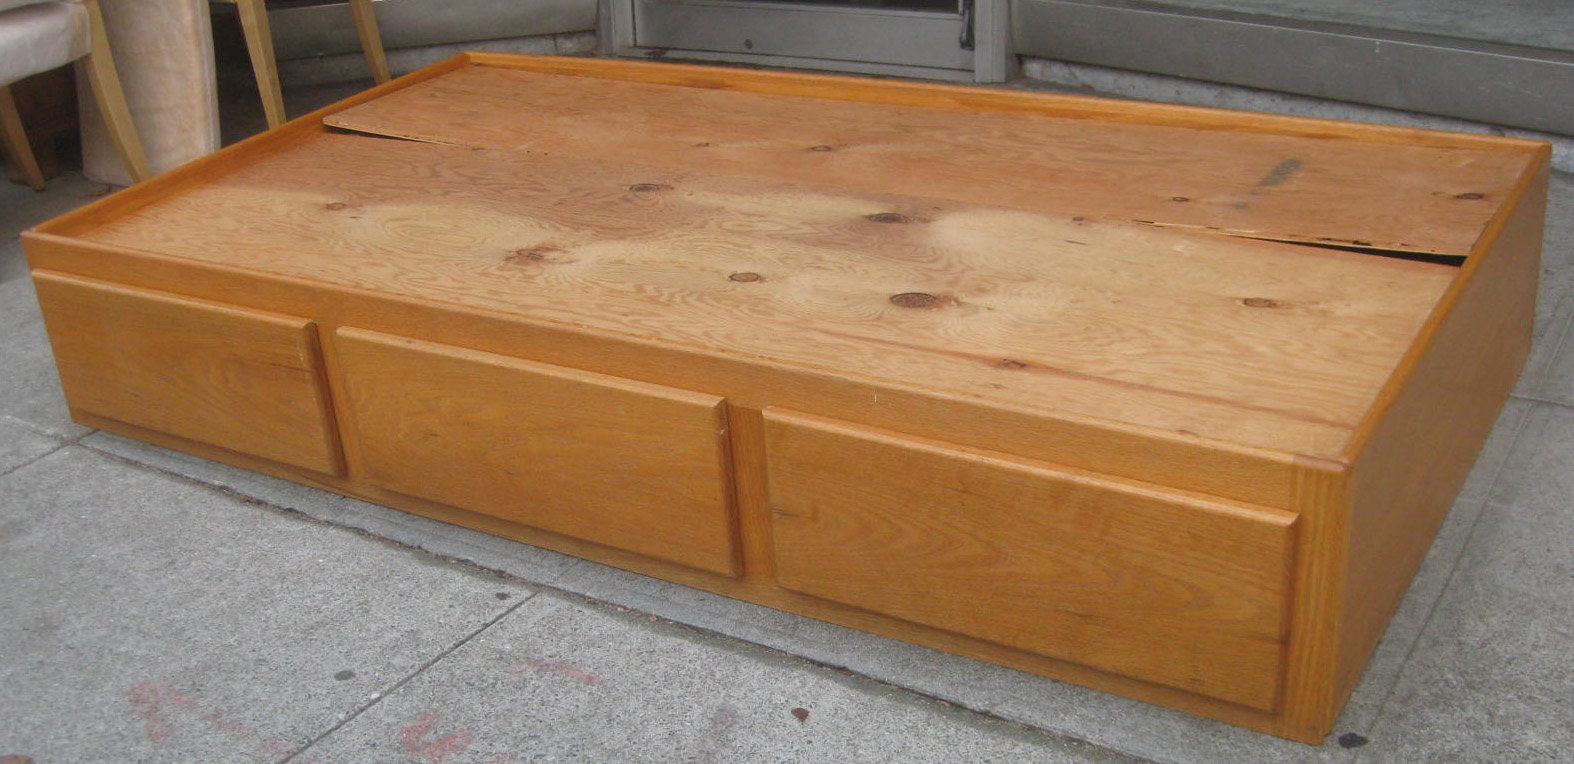 UHURU FURNITURE &amp; COLLECTIBLES: SOLD - Twin Pine Captain's 